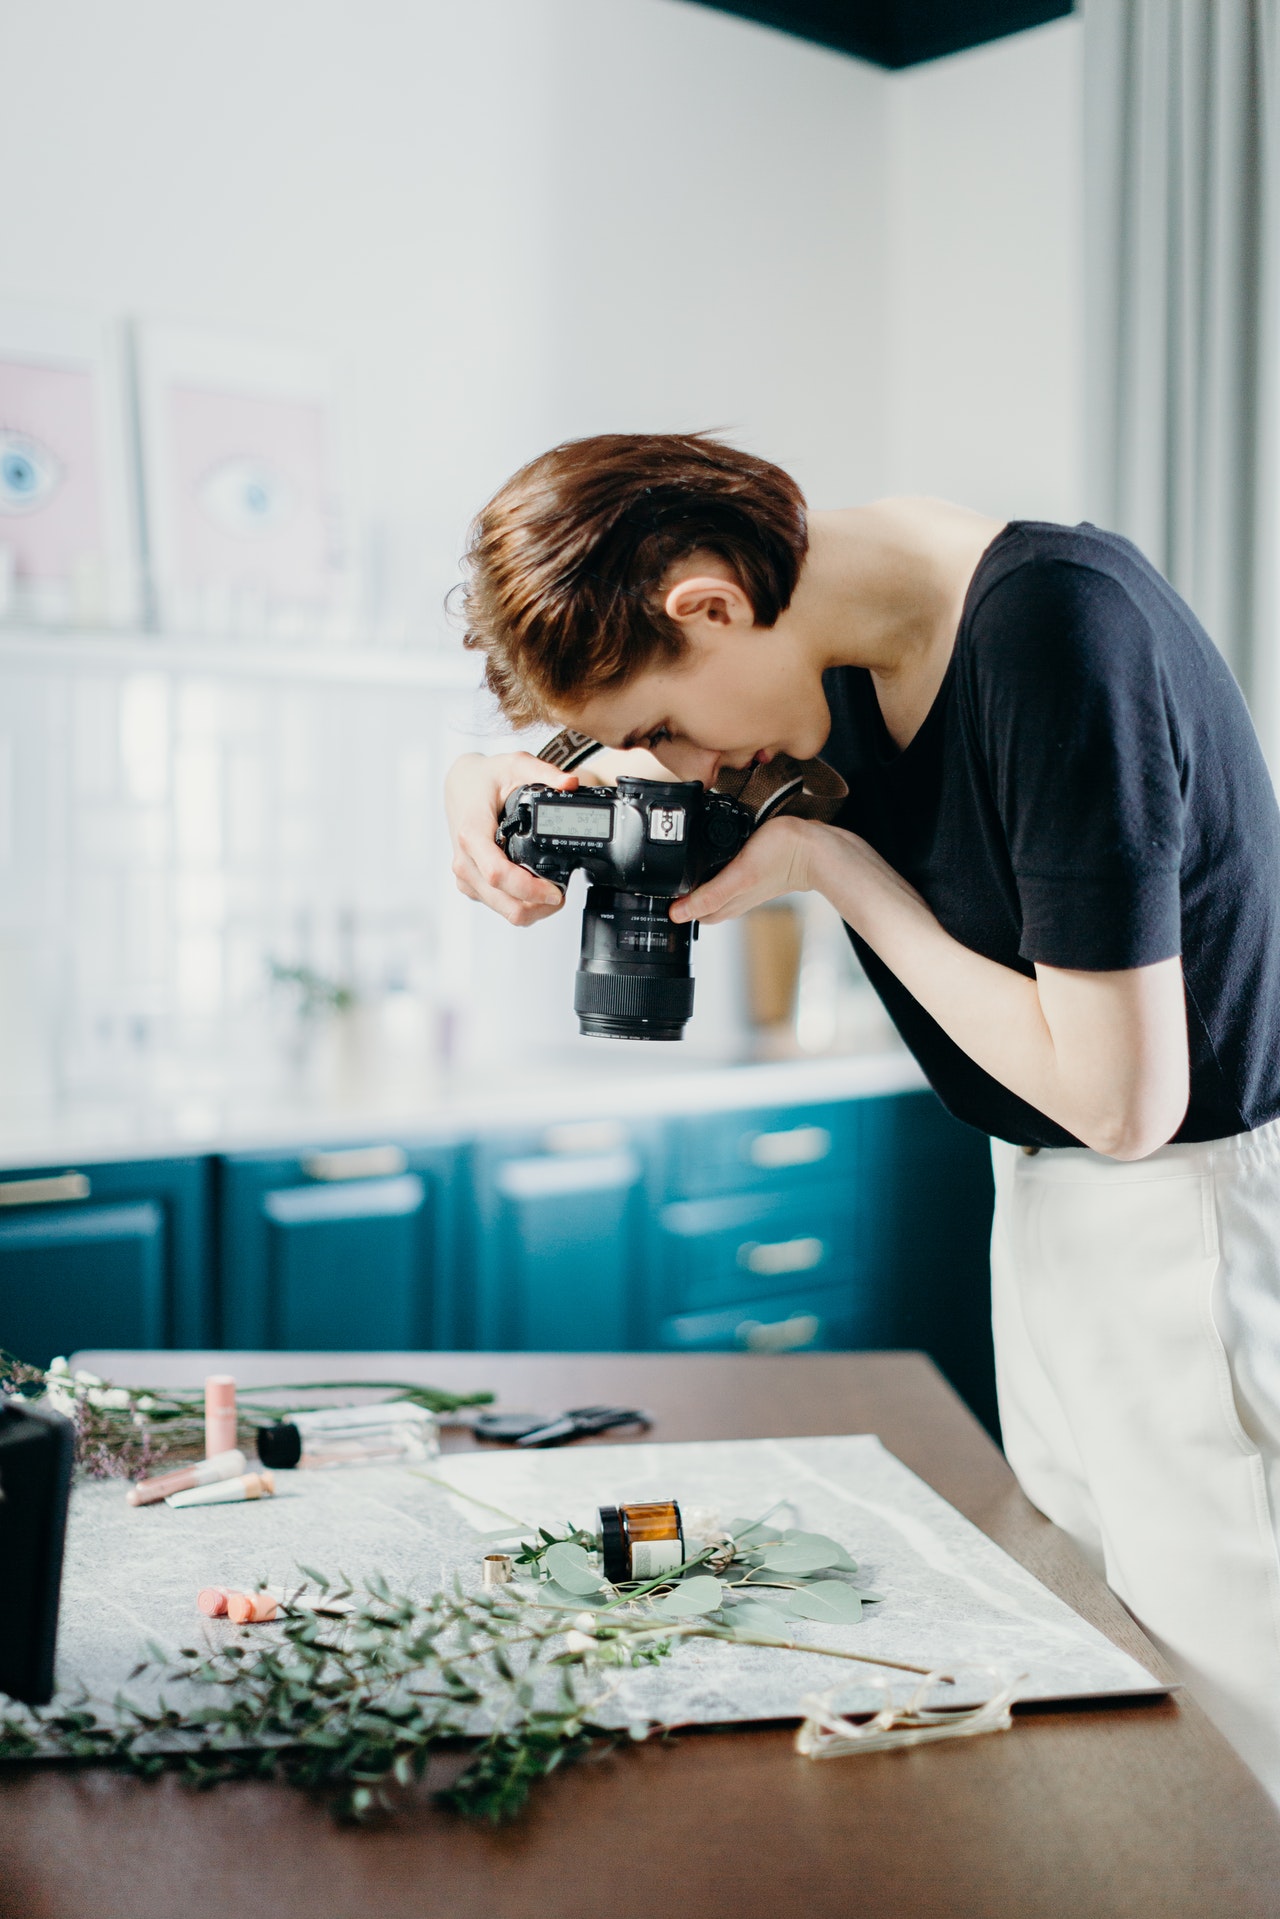 Working with a Pro Product Photographer—5 Reasons to Hire One